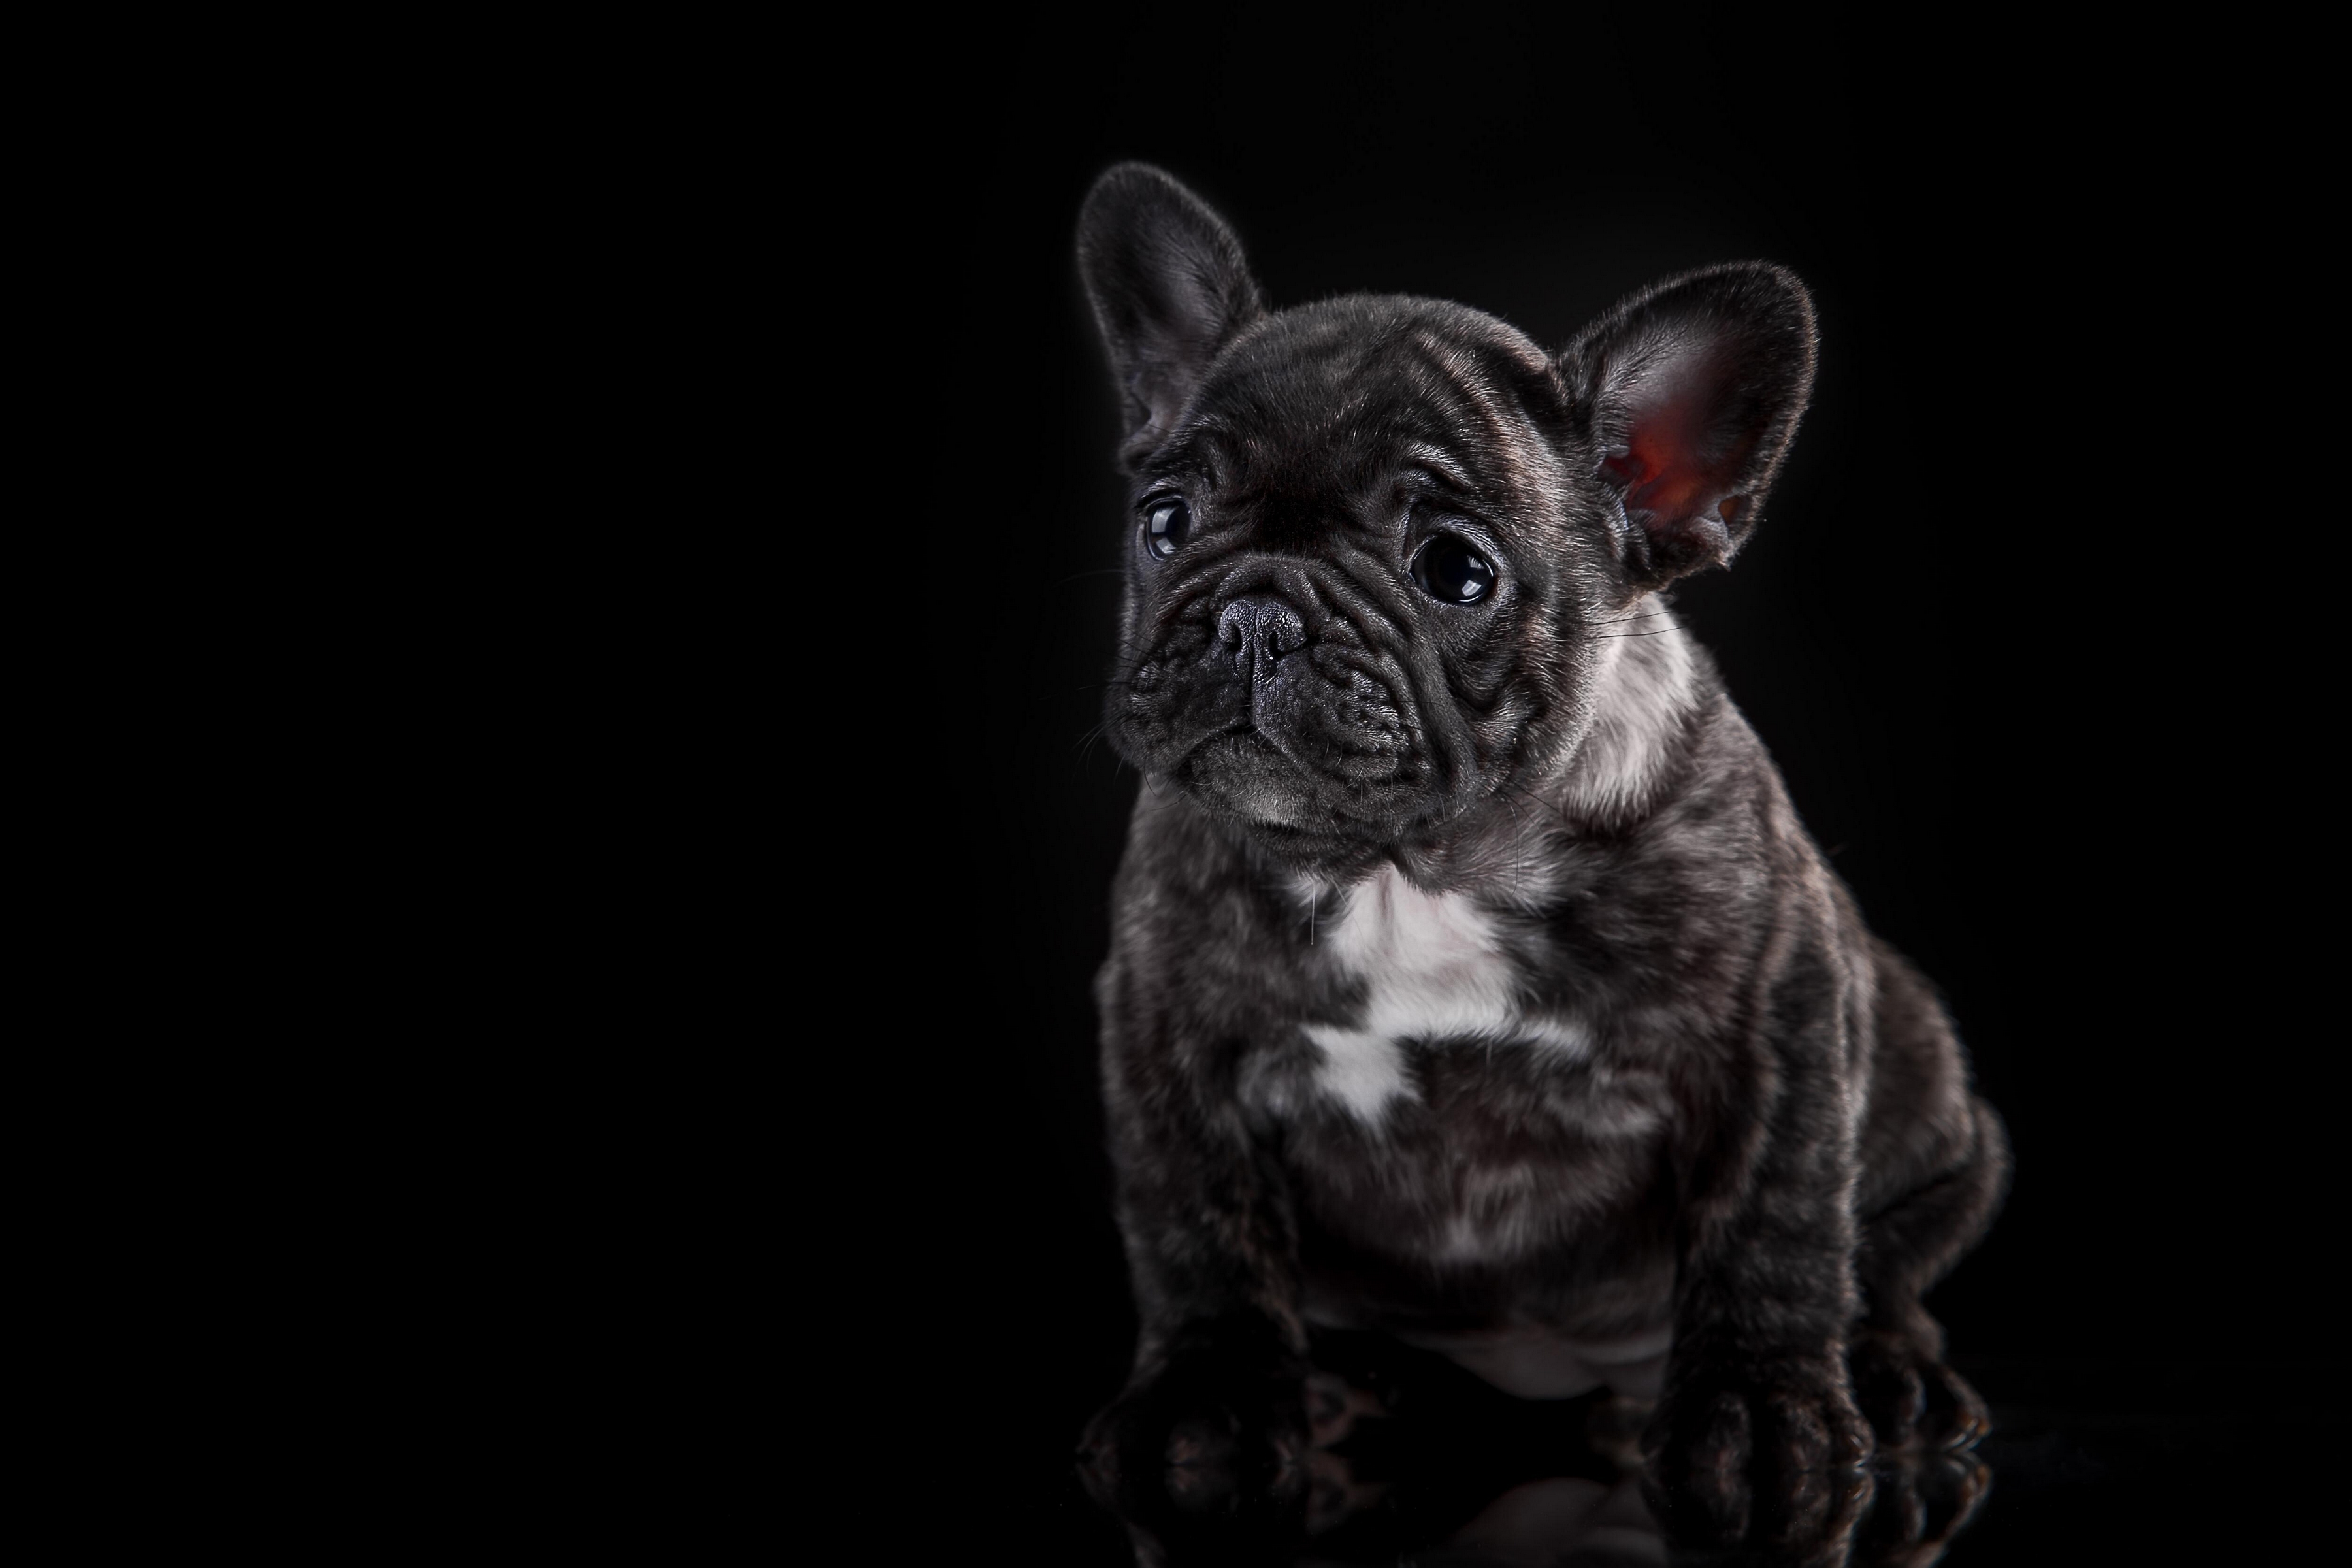 114308 download wallpaper puppy, dark, dog, french bulldog screensavers and pictures for free